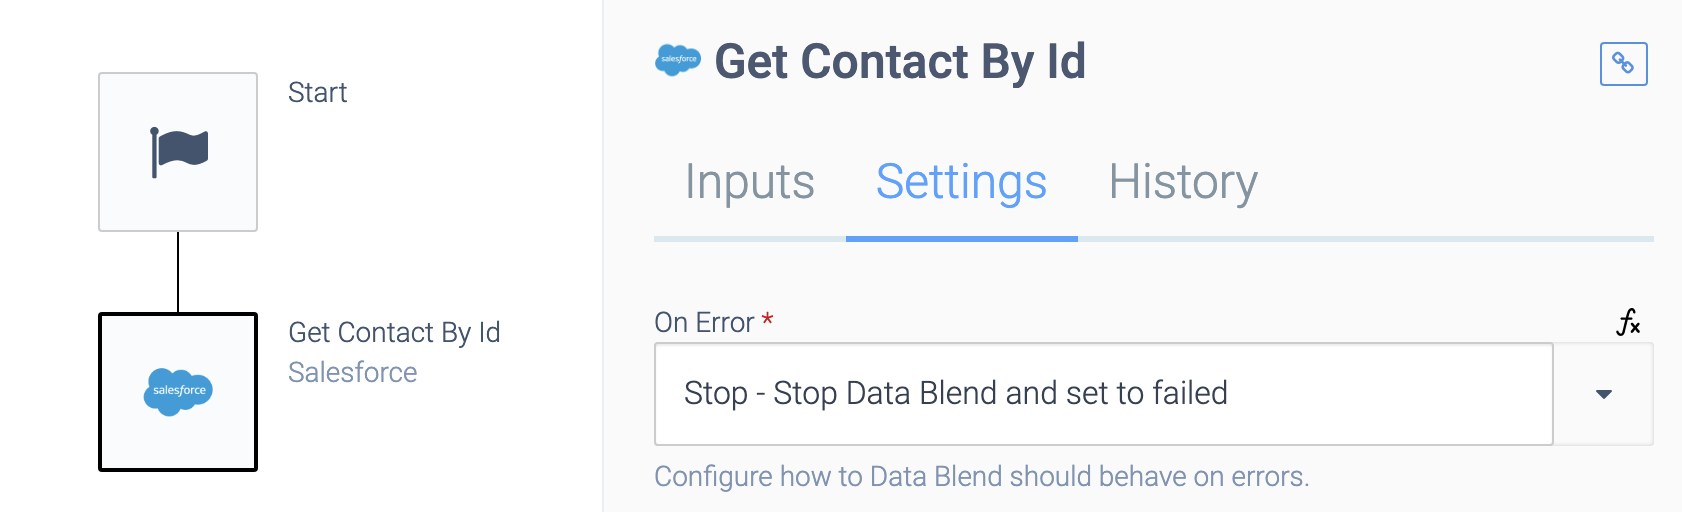 The Settings tab of a Get Contact By Id block. The On Error field is set to Stop - Stop Datan automation and set to failed.